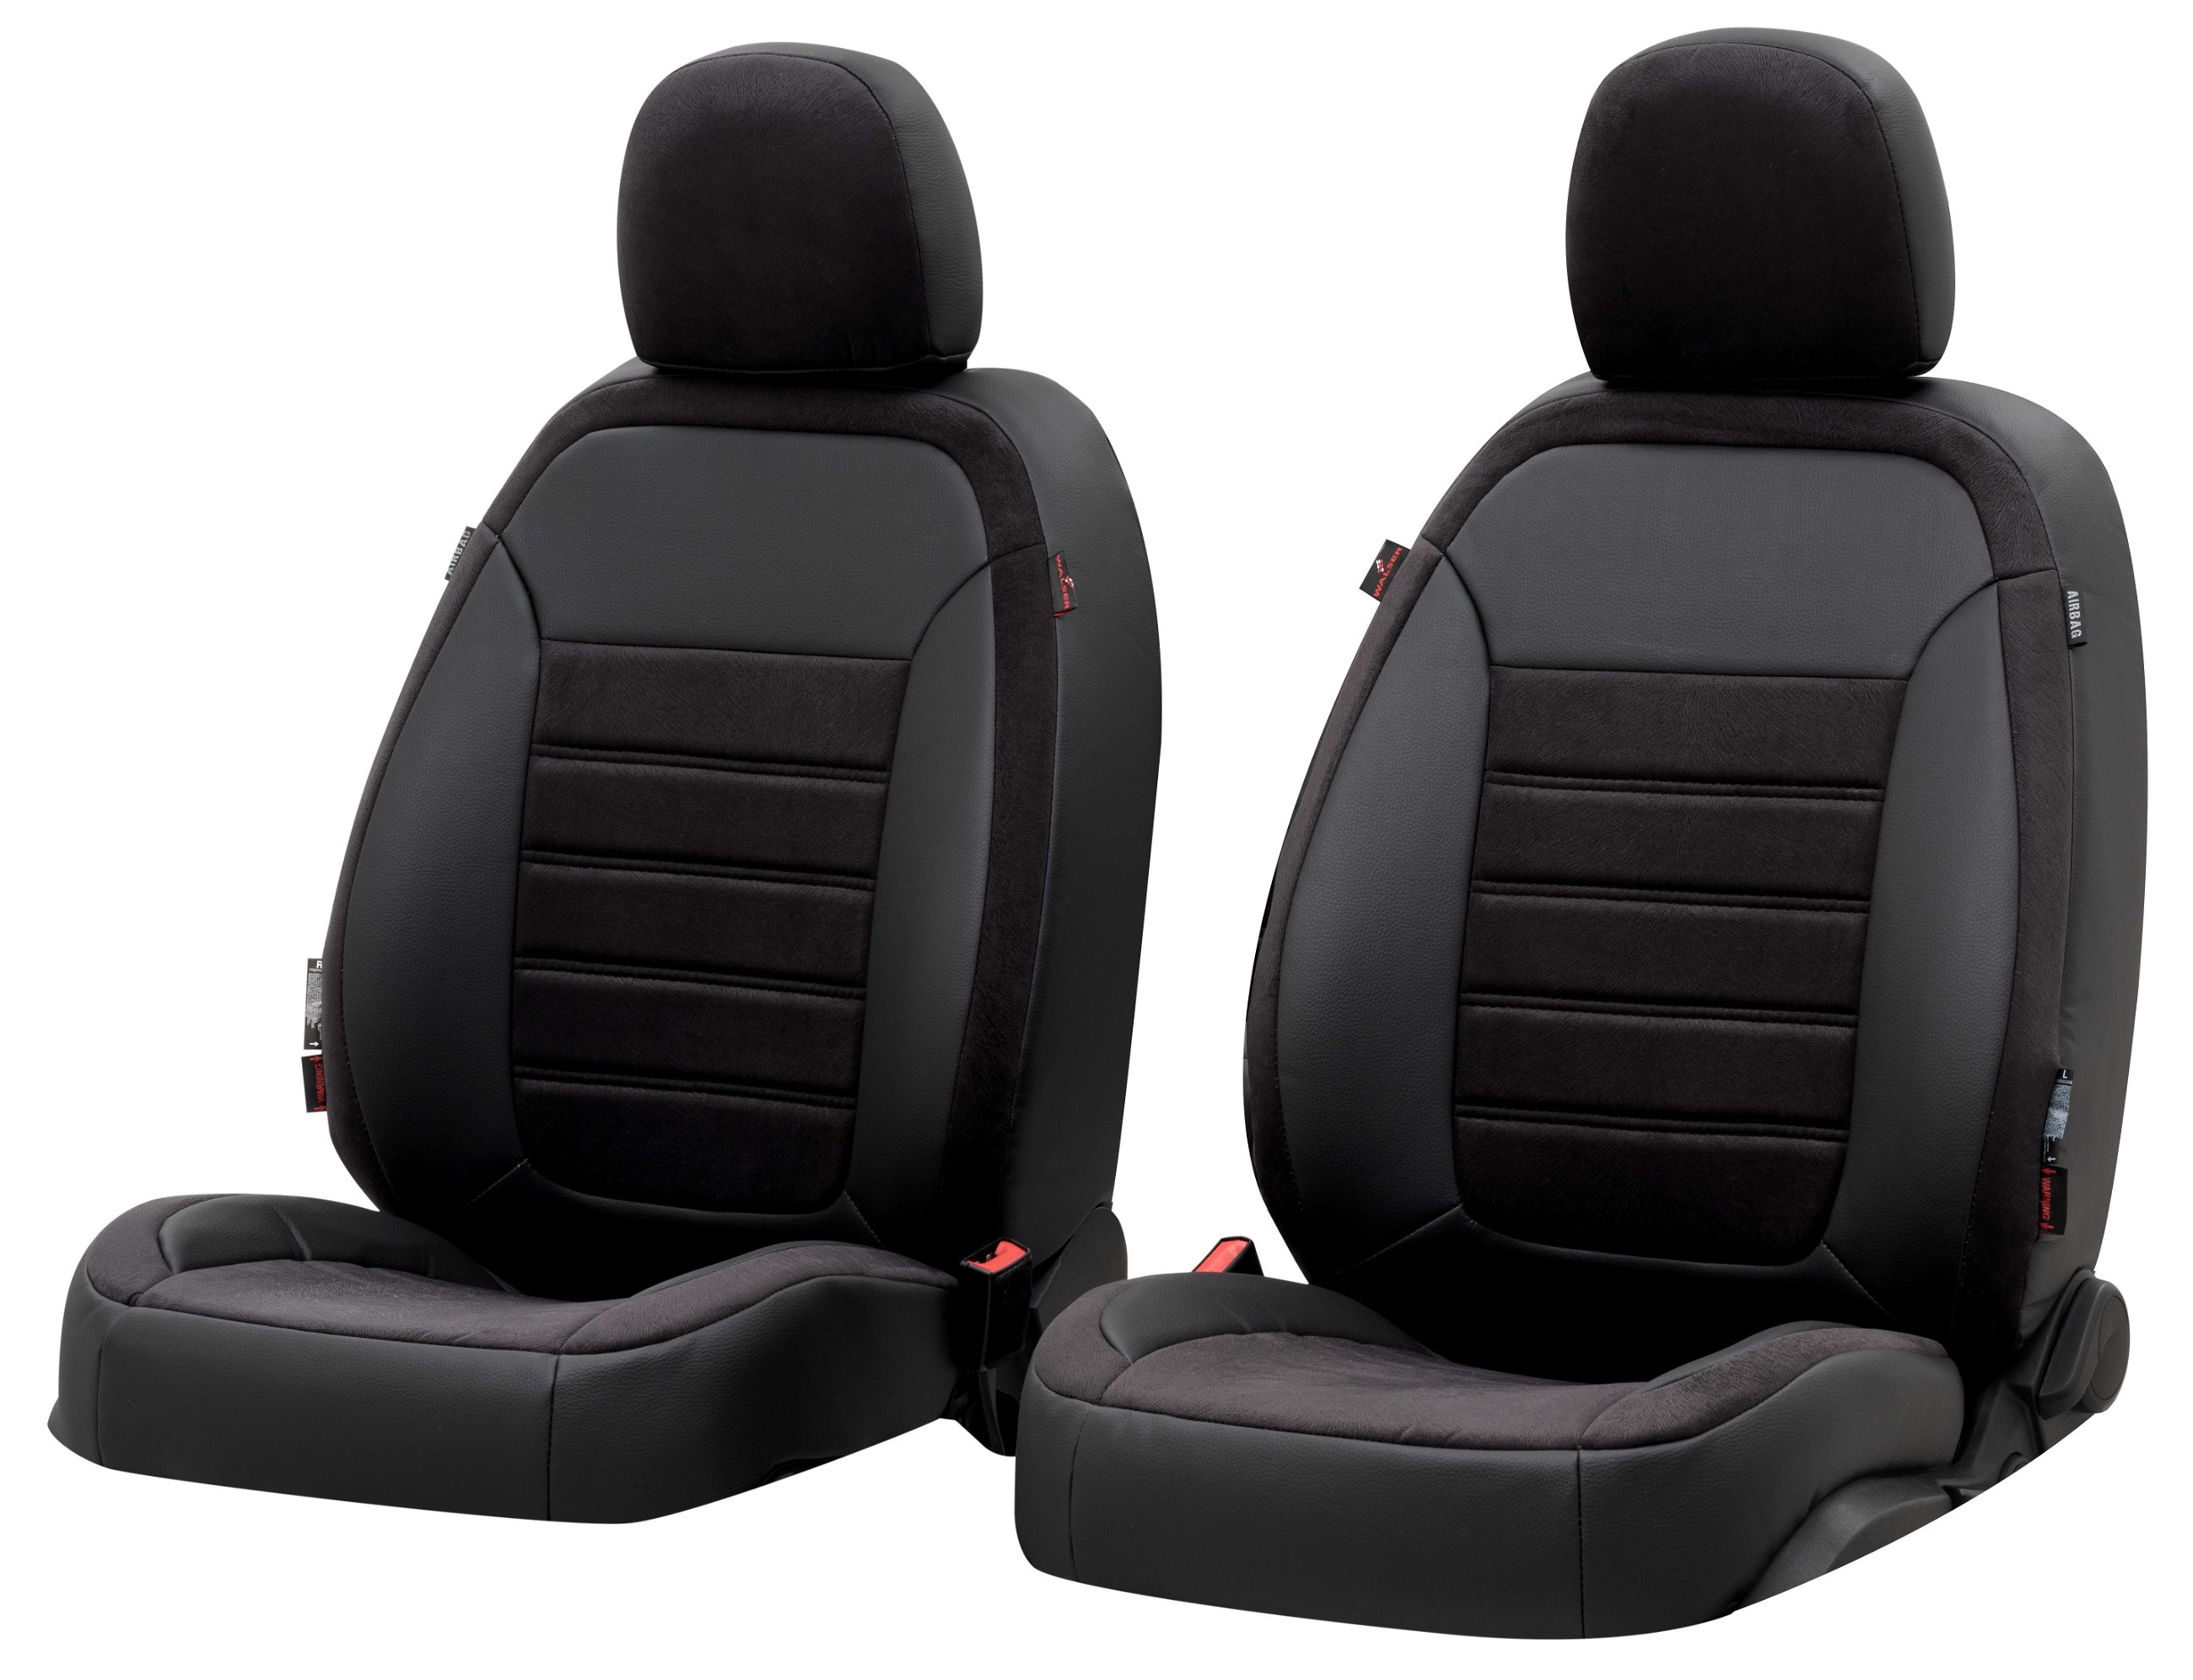 Seat Cover Bari for Hyundai i10 (BA, IA) 08/2013-Today, 2 seat covers for normal seats